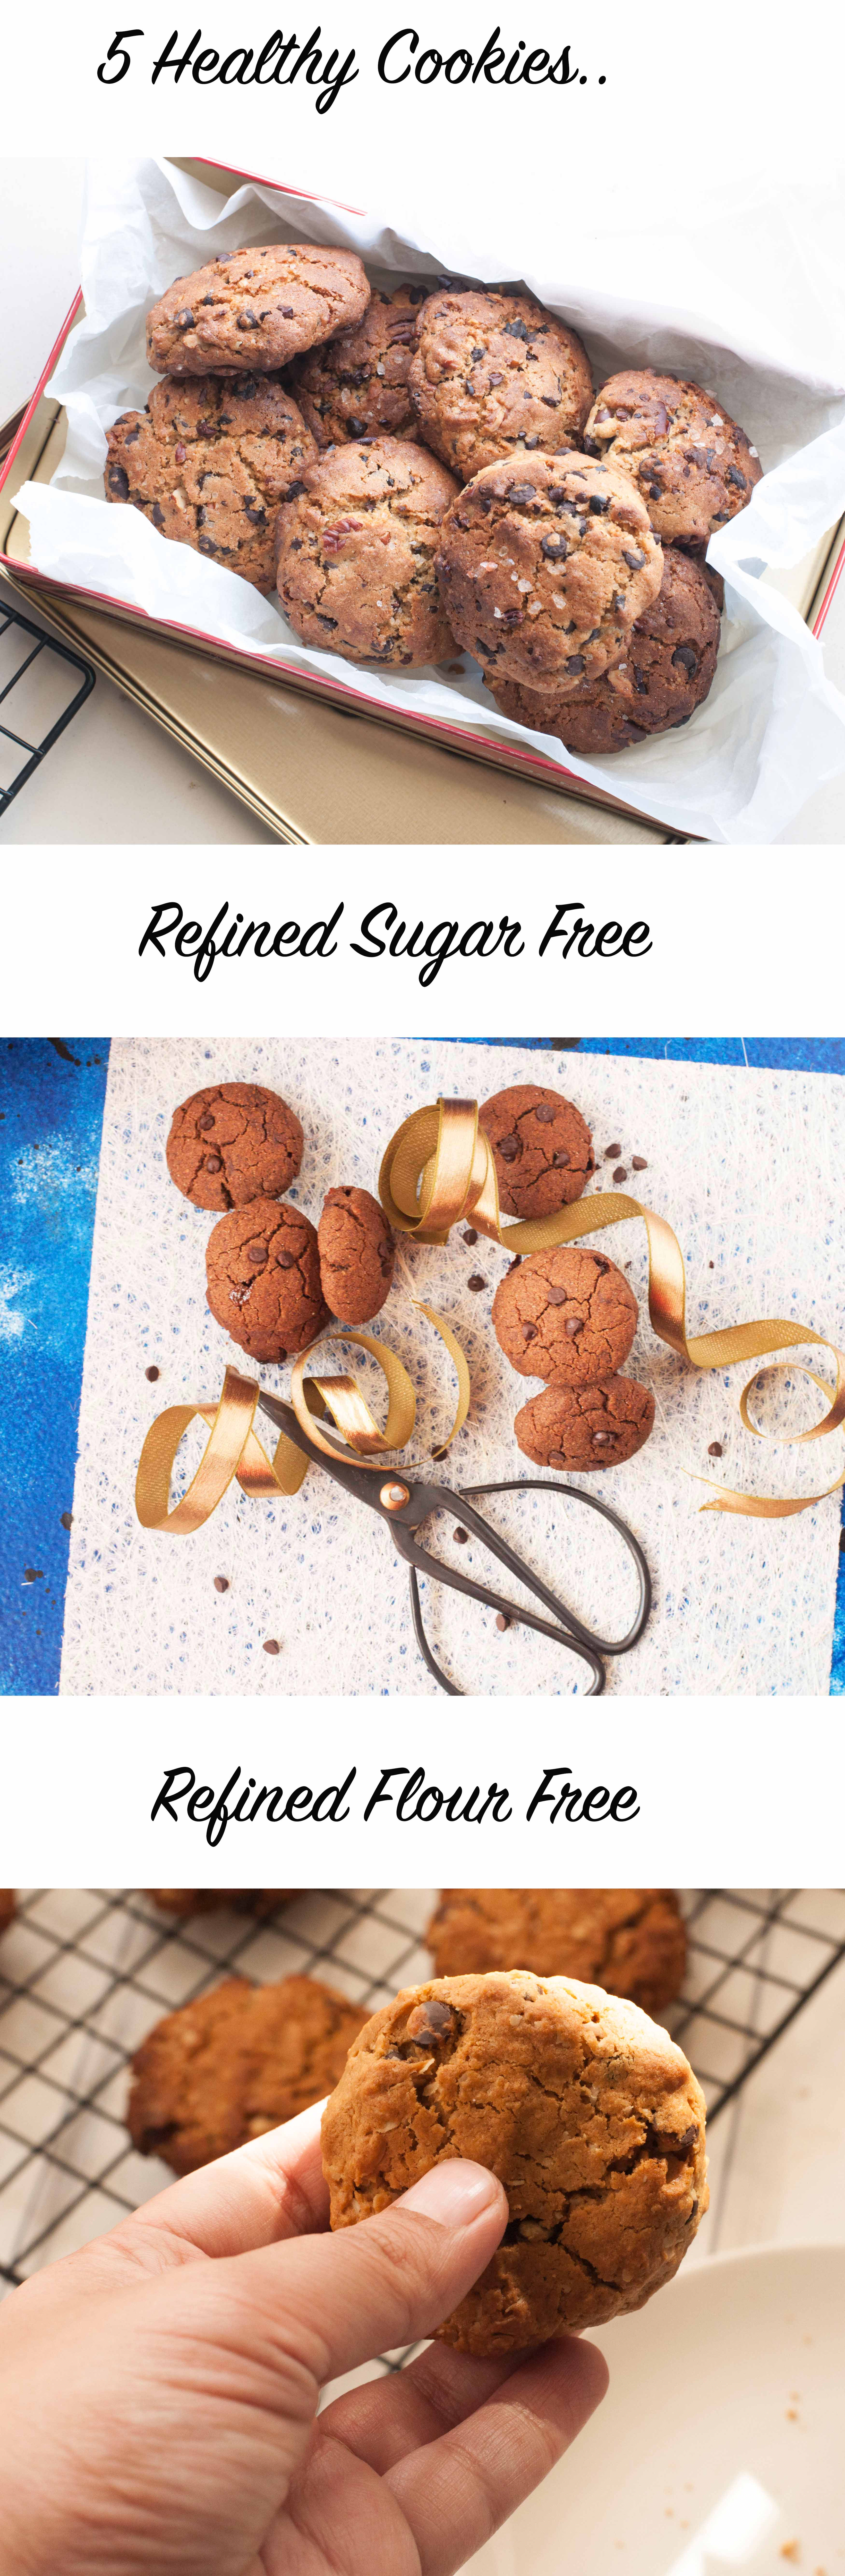 5 Healthy Cookies without refined flour and refined sugar